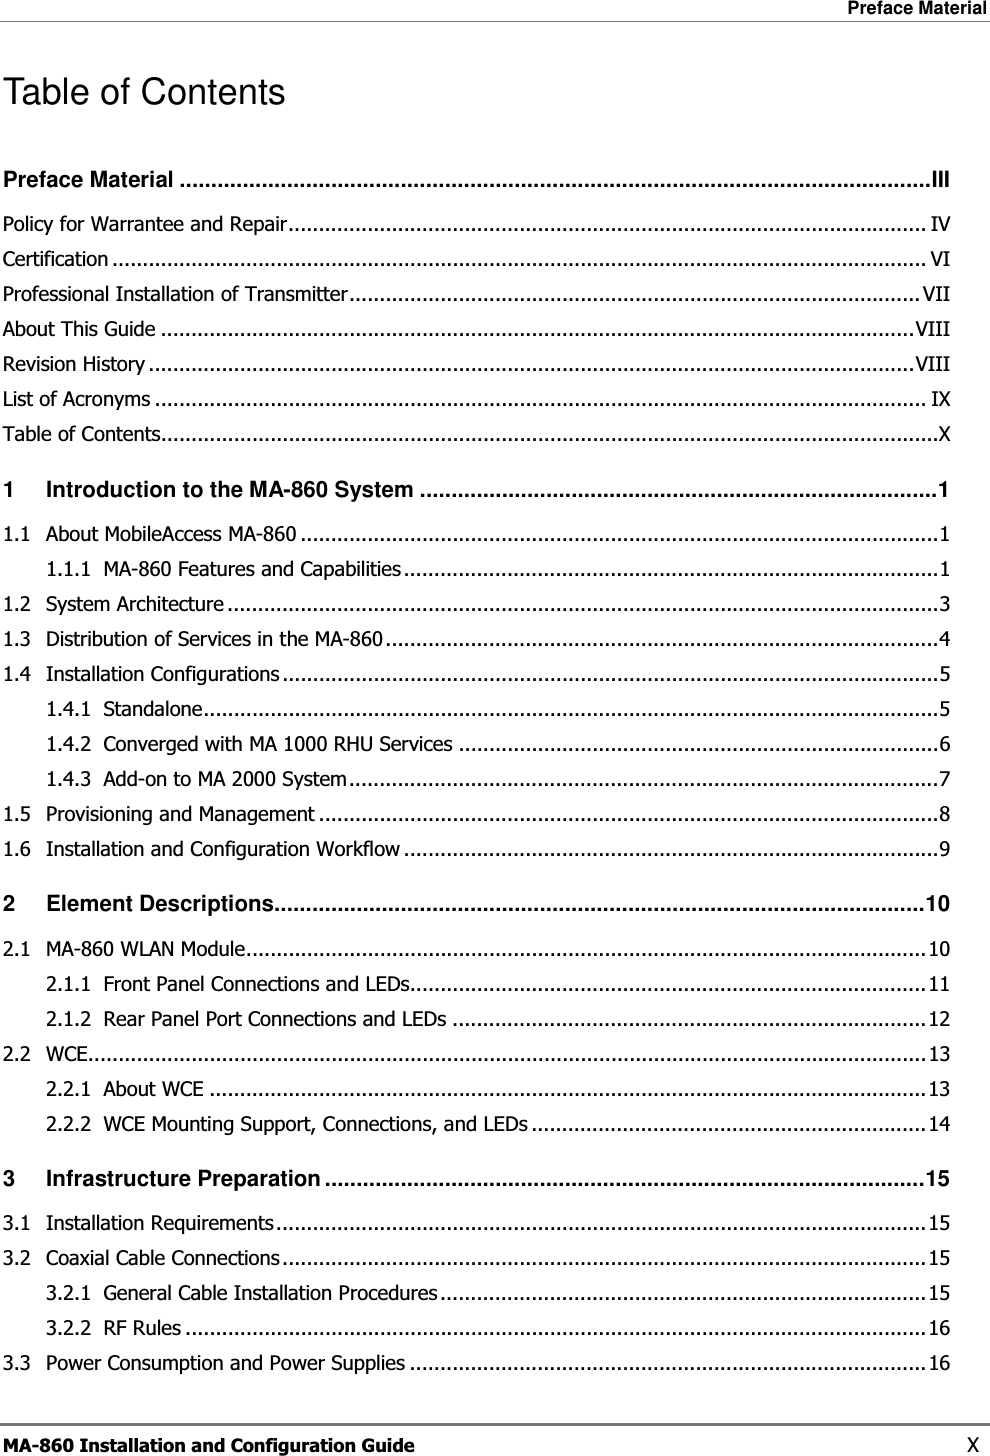 Preface Material  MA-860 Installation and Configuration Guide    X Table of Contents Preface Material .......................................................................................................................IIIPolicy for Warrantee and Repair......................................................................................................... IVCertification ...................................................................................................................................... VIProfessional Installation of Transmitter.............................................................................................. VIIAbout This Guide ............................................................................................................................VIIIRevision History ..............................................................................................................................VIIIList of Acronyms ............................................................................................................................... IXTable of Contents................................................................................................................................X1 Introduction to the MA-860 System ..................................................................................11.1 About MobileAccess MA-860 .........................................................................................................11.1.1 MA-860 Features and Capabilities ........................................................................................11.2 System Architecture .....................................................................................................................31.3 Distribution of Services in the MA-860...........................................................................................41.4 Installation Configurations ............................................................................................................51.4.1 Standalone.........................................................................................................................51.4.2 Converged with MA 1000 RHU Services ...............................................................................61.4.3 Add-on to MA 2000 System.................................................................................................71.5 Provisioning and Management ......................................................................................................81.6 Installation and Configuration Workflow ........................................................................................92 Element Descriptions.......................................................................................................102.1 MA-860 WLAN Module................................................................................................................102.1.1 Front Panel Connections and LEDs.....................................................................................112.1.2 Rear Panel Port Connections and LEDs ..............................................................................122.2 WCE..........................................................................................................................................132.2.1 About WCE ......................................................................................................................132.2.2 WCE Mounting Support, Connections, and LEDs .................................................................143 Infrastructure Preparation ...............................................................................................153.1 Installation Requirements...........................................................................................................153.2 Coaxial Cable Connections ..........................................................................................................153.2.1 General Cable Installation Procedures ................................................................................153.2.2 RF Rules ..........................................................................................................................163.3 Power Consumption and Power Supplies .....................................................................................16